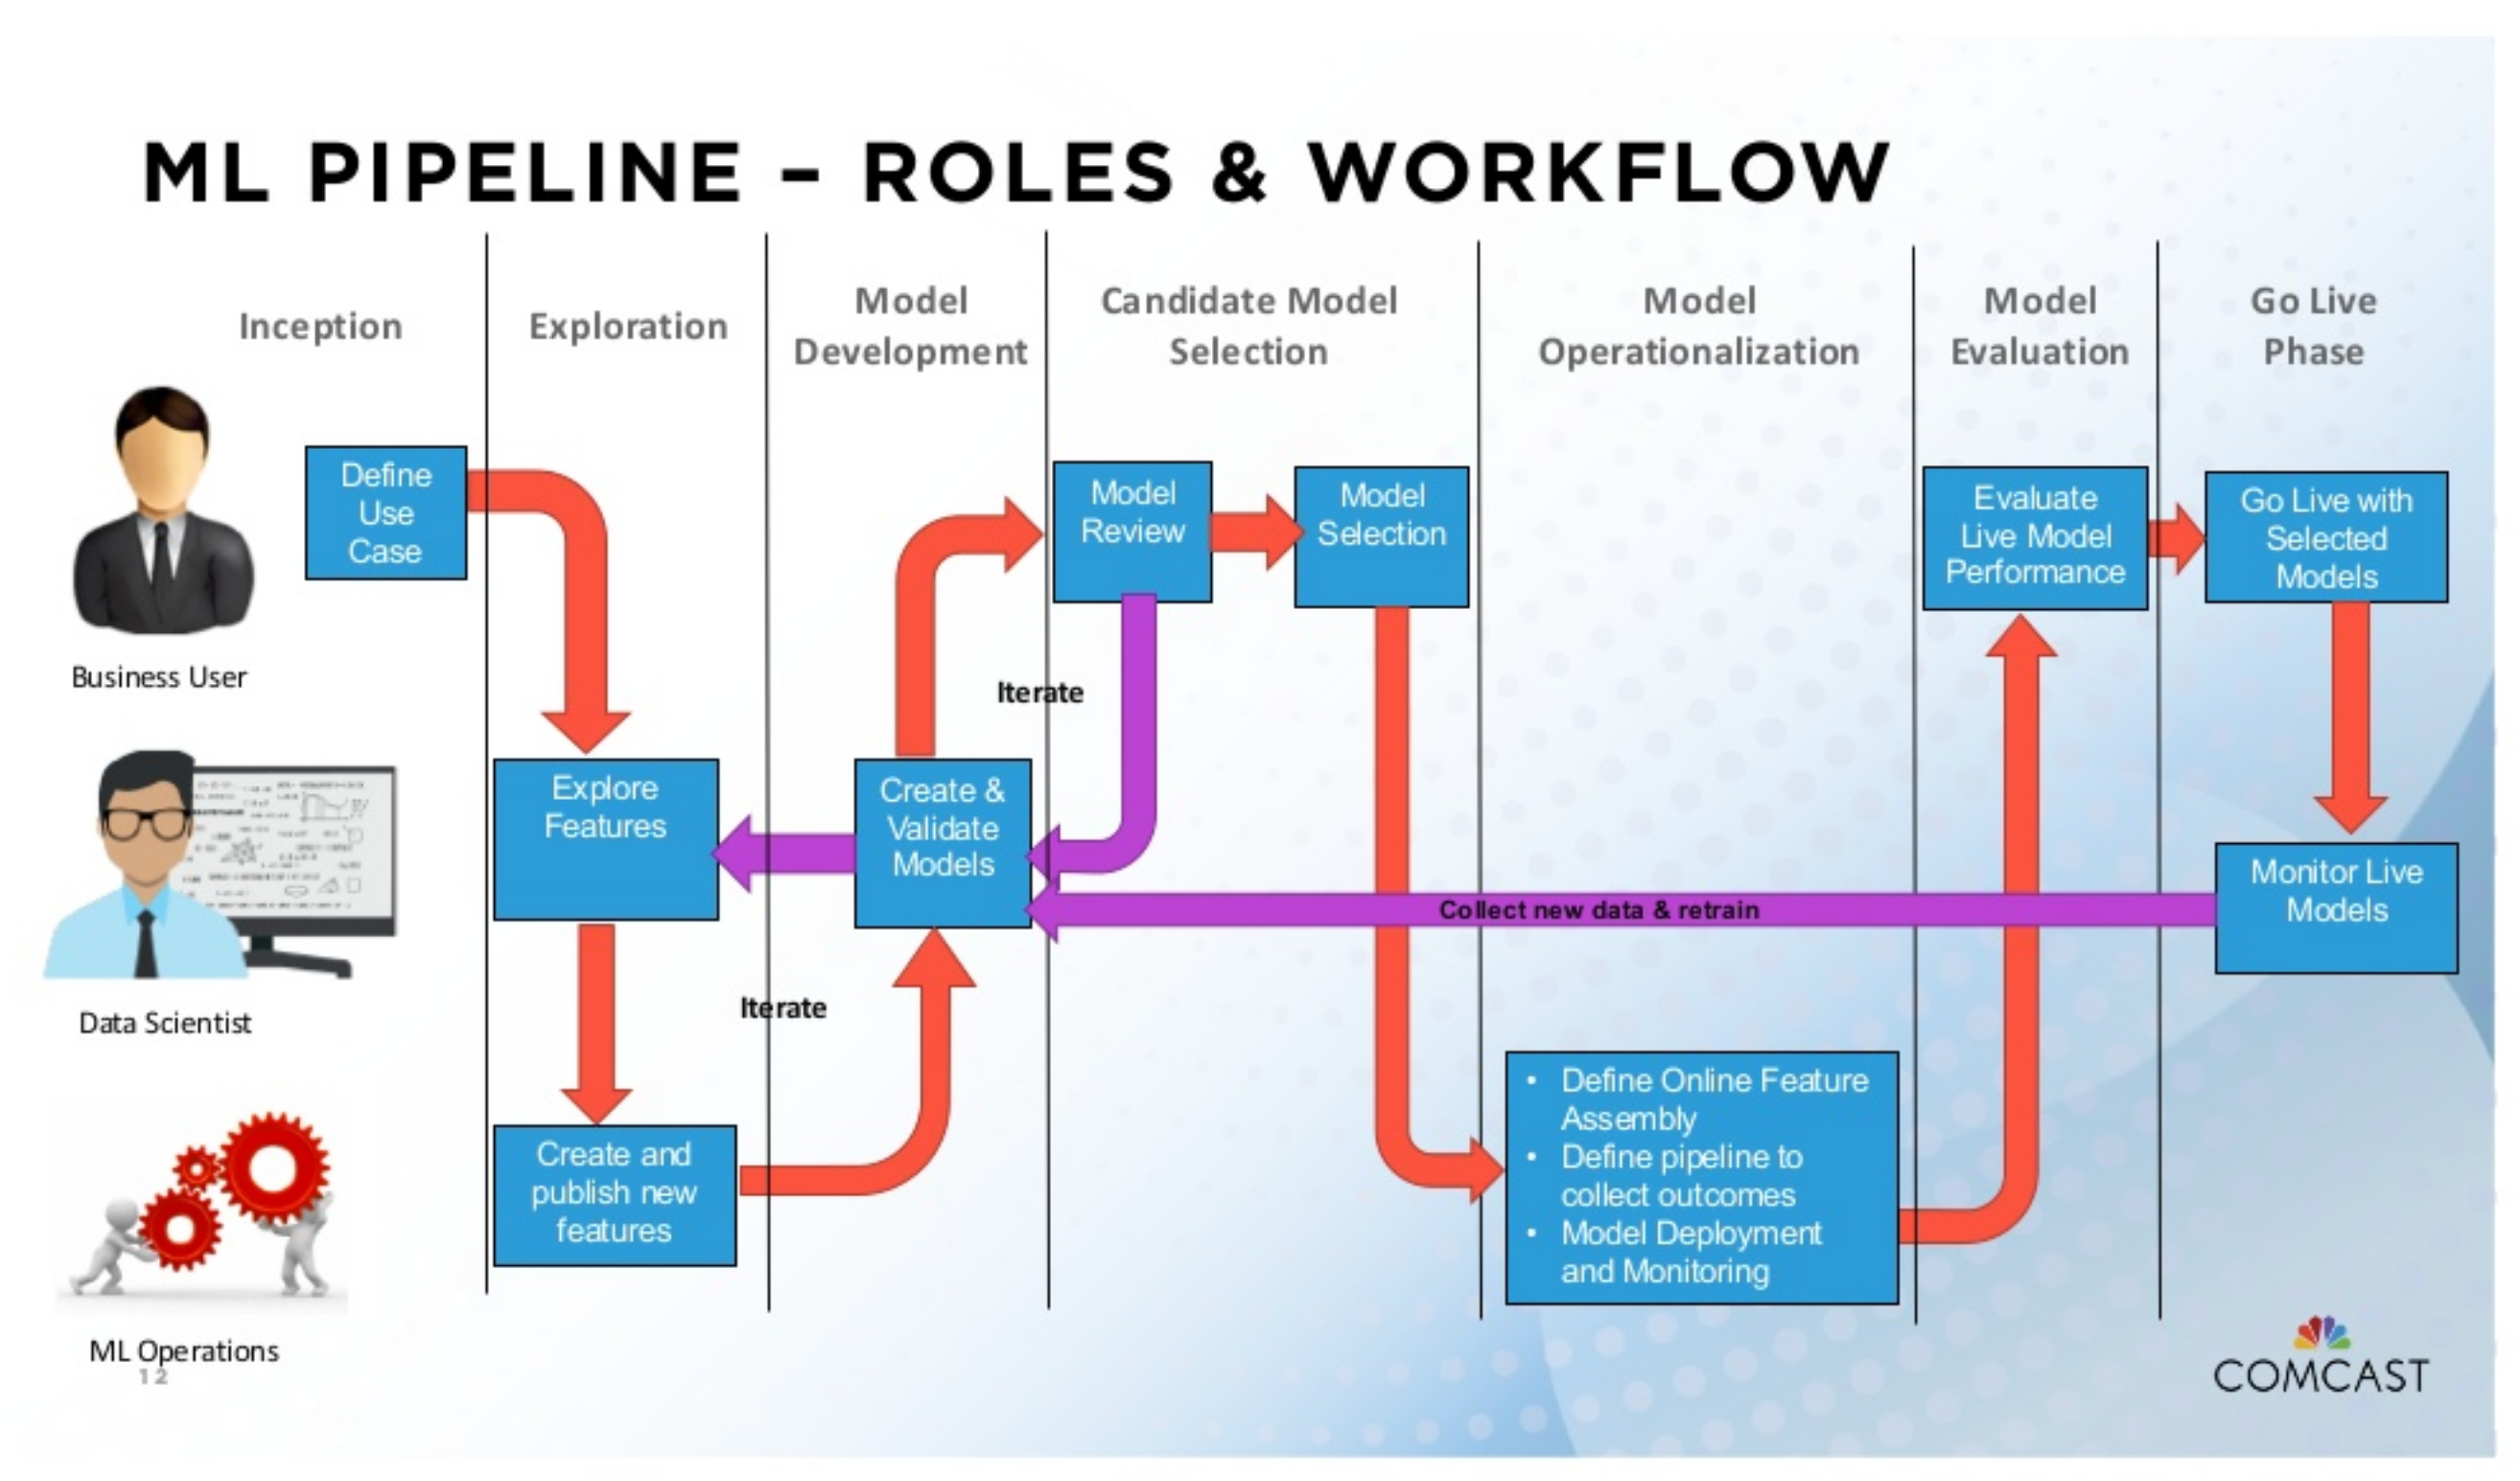 ML pipeline flow example, and roles